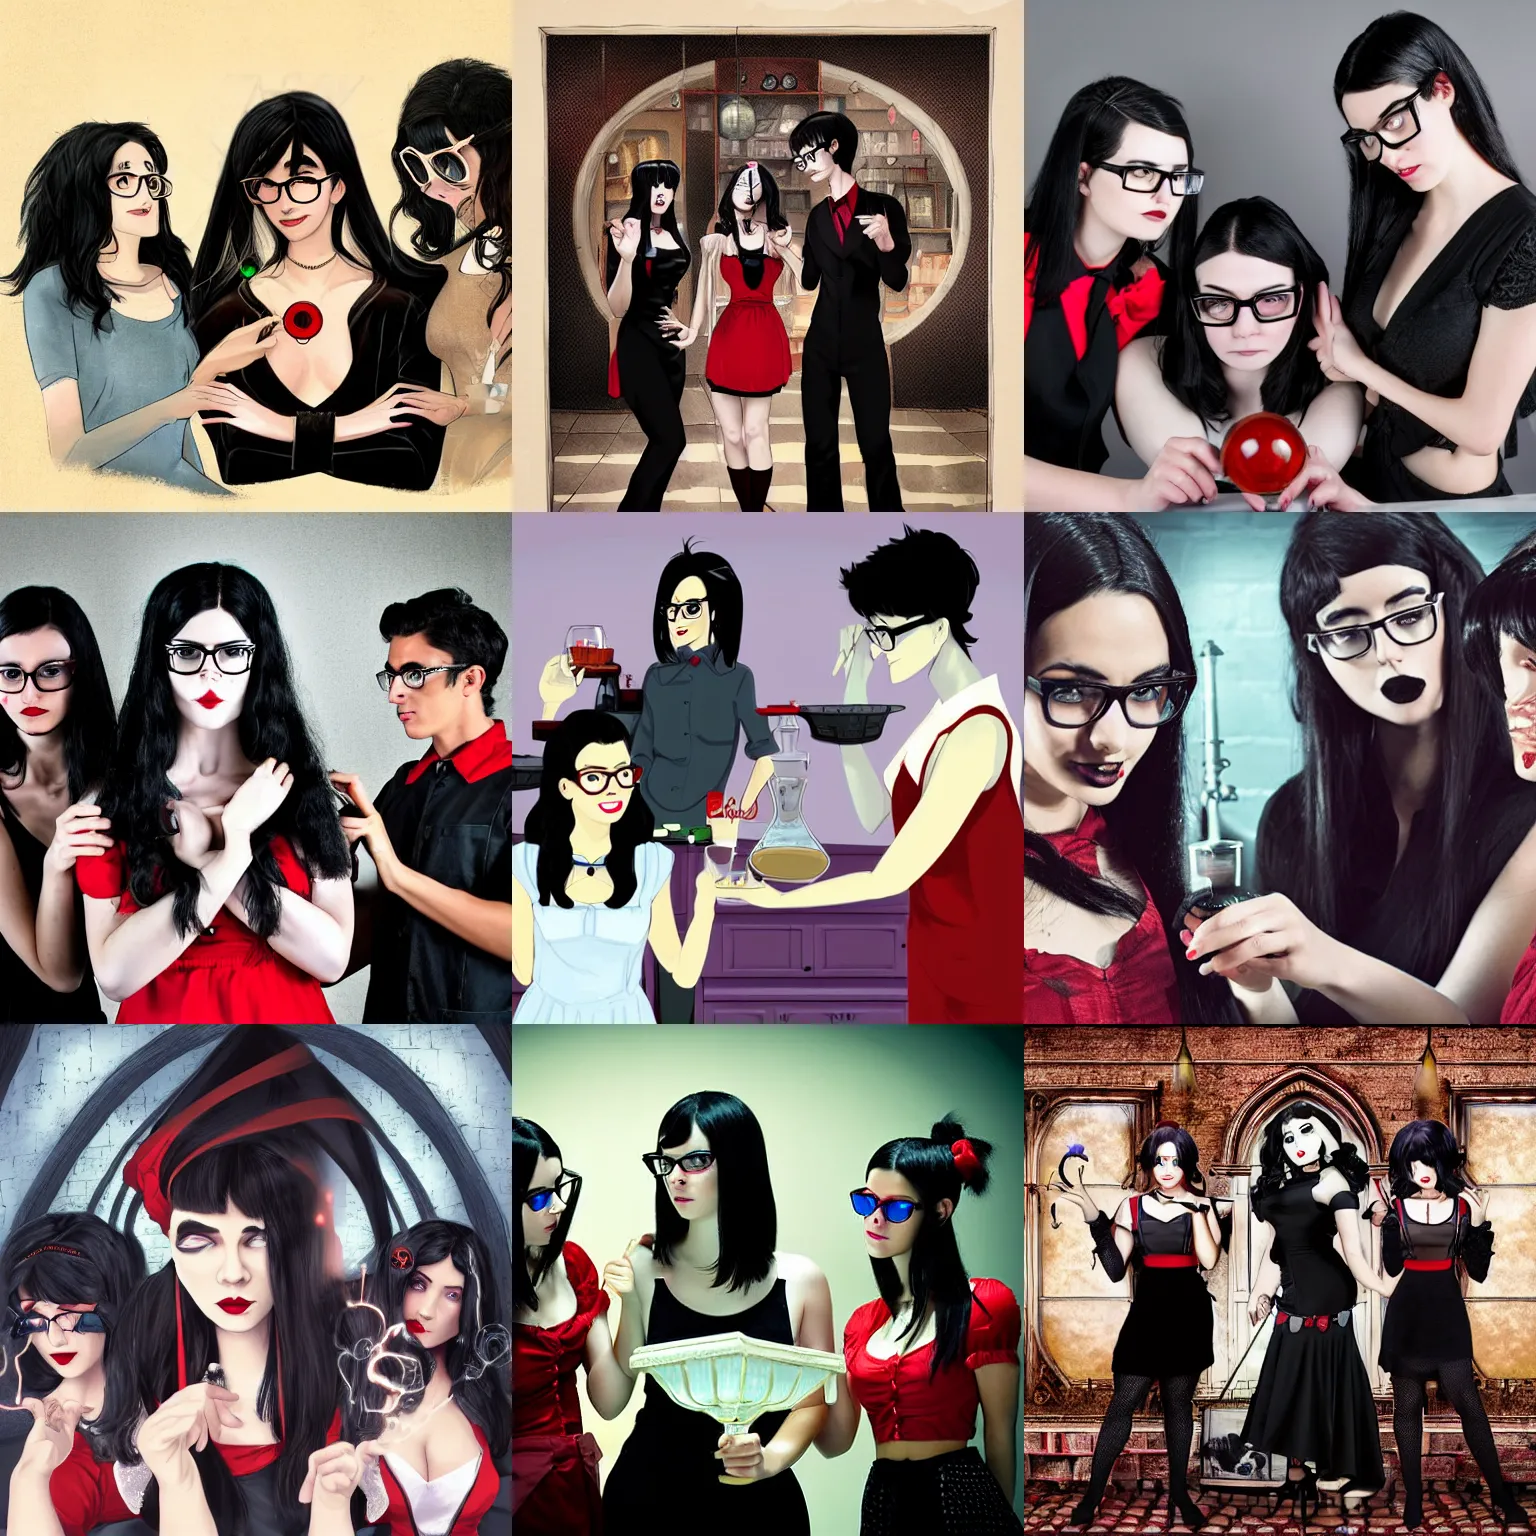 Prompt: Three friends working in a magic laboratory, one of the friends is a young man with black hair and glasses, the second friend is a beautiful young woman with brunette hair, the third friend is a cute goth girl with red and black hair, wide angle photography, highly detailed and intricate, rule of thirds, color theory, magic laboratory setting, soft lighting, realistic photograph